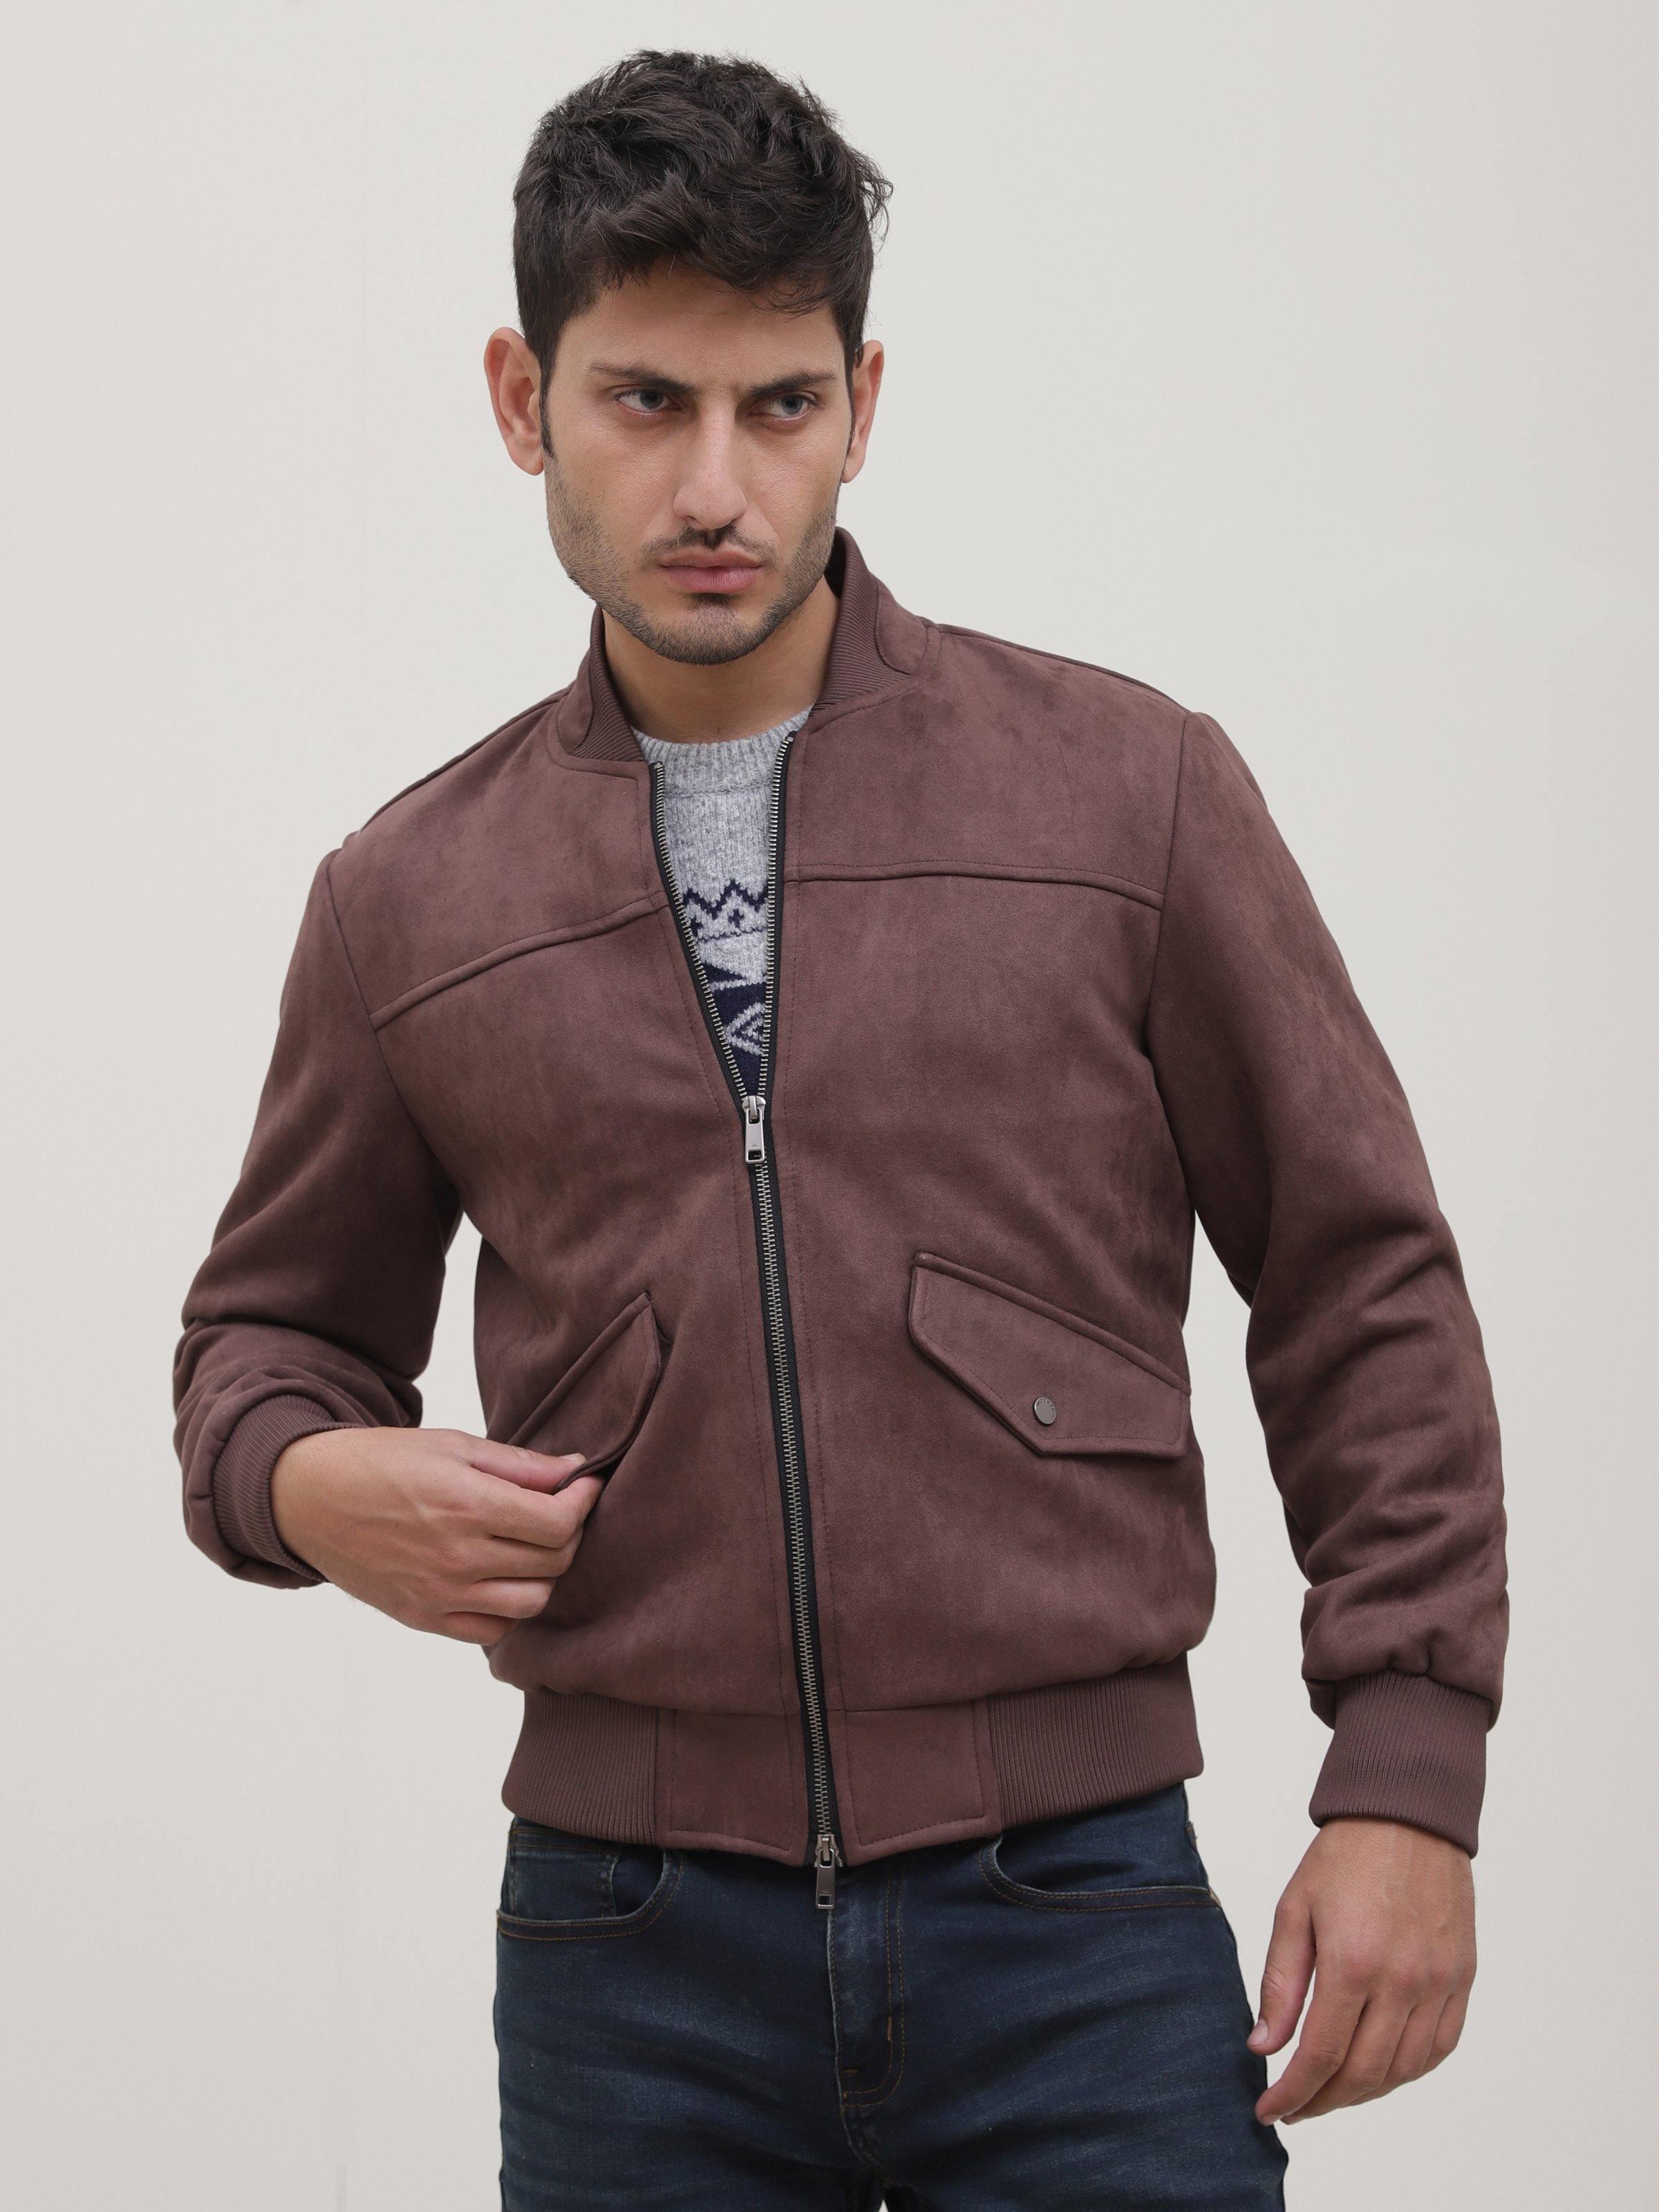 JACKET FULL SLEEVE COFFEE at Charcoal Clothing